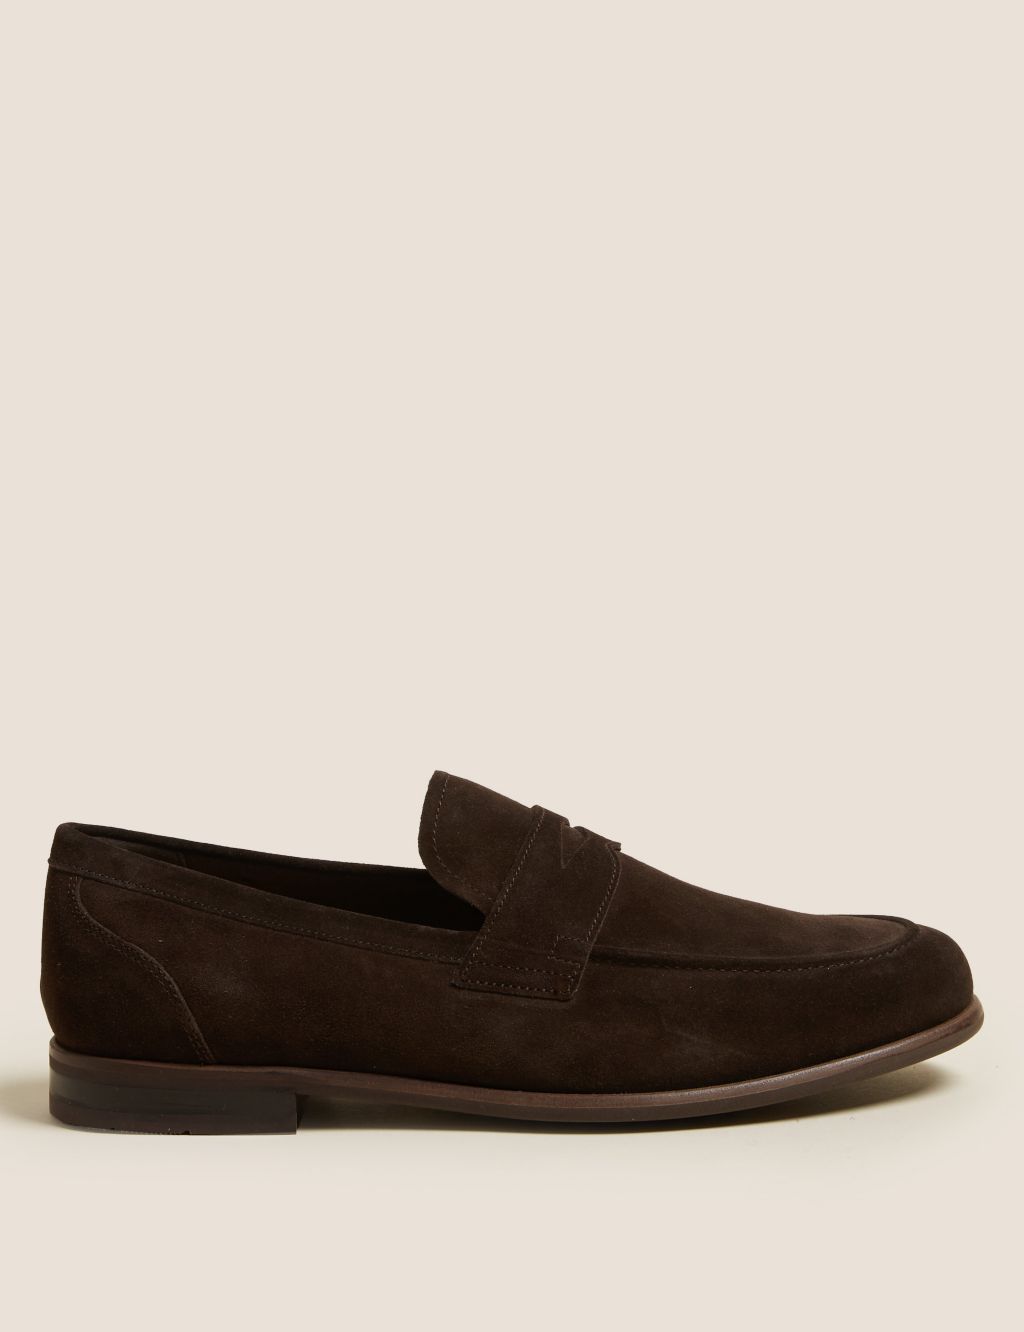 Suede Stain Resistant Slip-On Loafers image 1